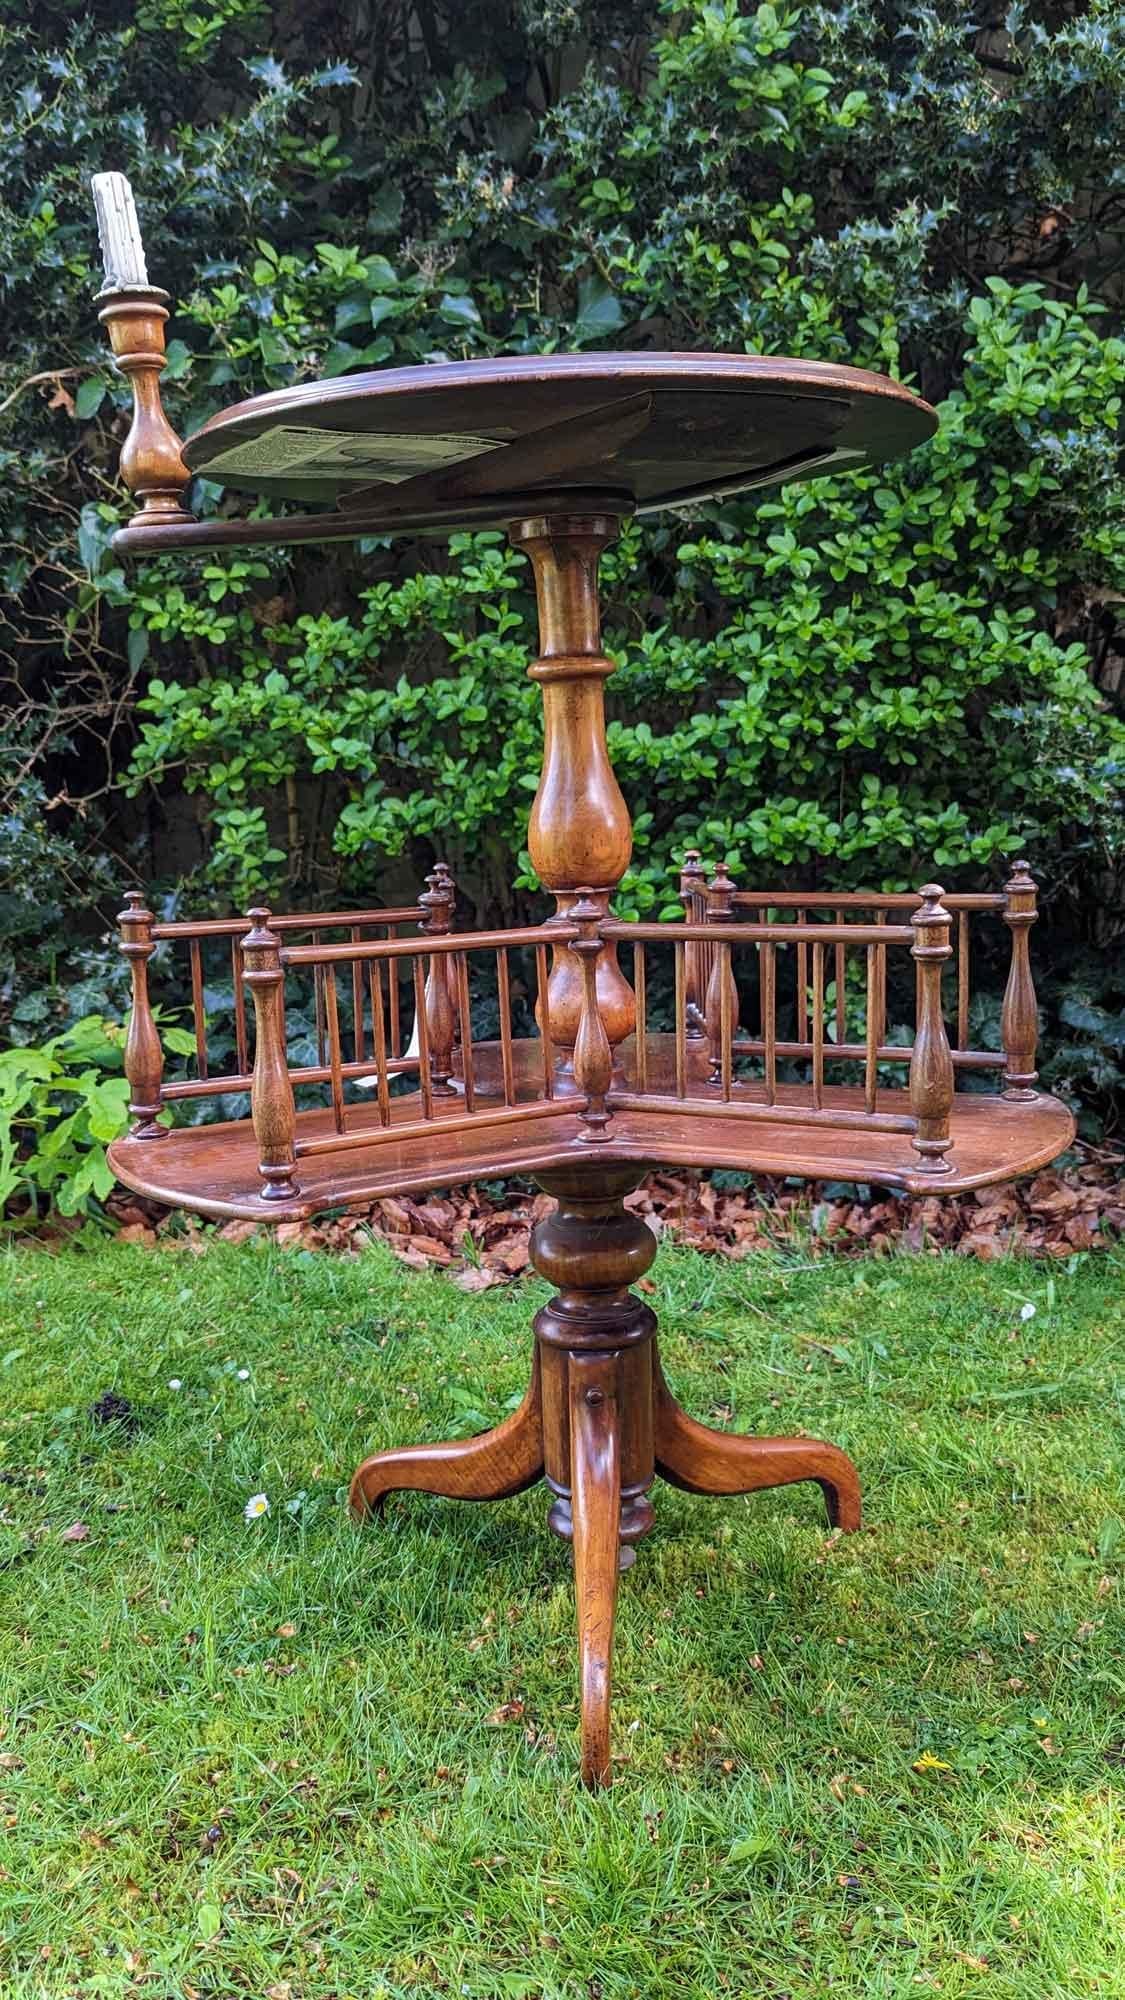 This table was made in the mid-Victorian period — possibly about 1860. It measures 18 inches diameter across the top and the gallery tray has a slightly wider dimension of 24 inches. The table is 31 inches high and 14 inches to the middle